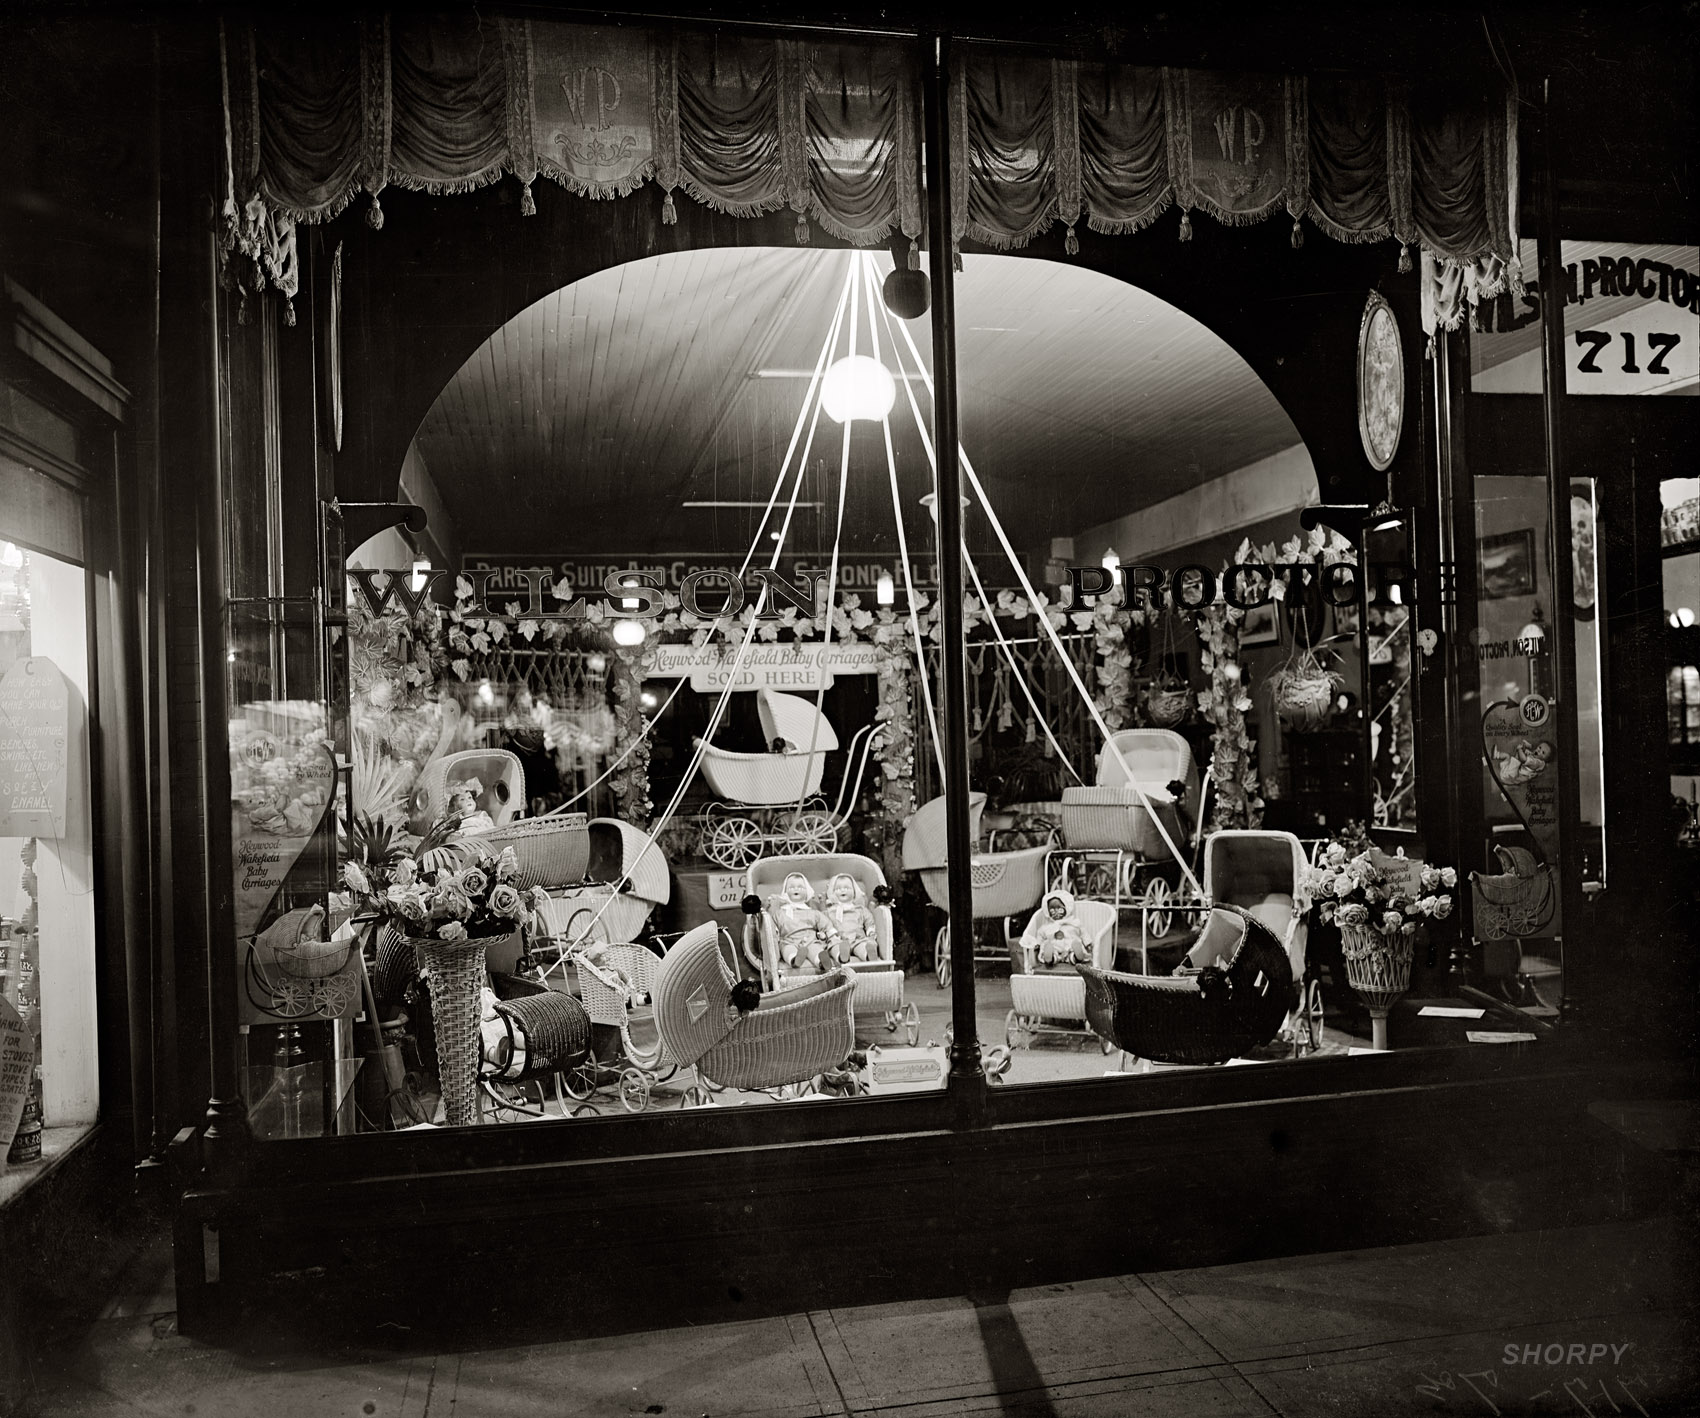 "Wilson Proctor Co. window." Continuing our survey of the spooky shop windows of Washington, we have this circa 1920 store display of Heywood-Wakefield baby carriages. National Photo Company Collection glass negative. View full size.